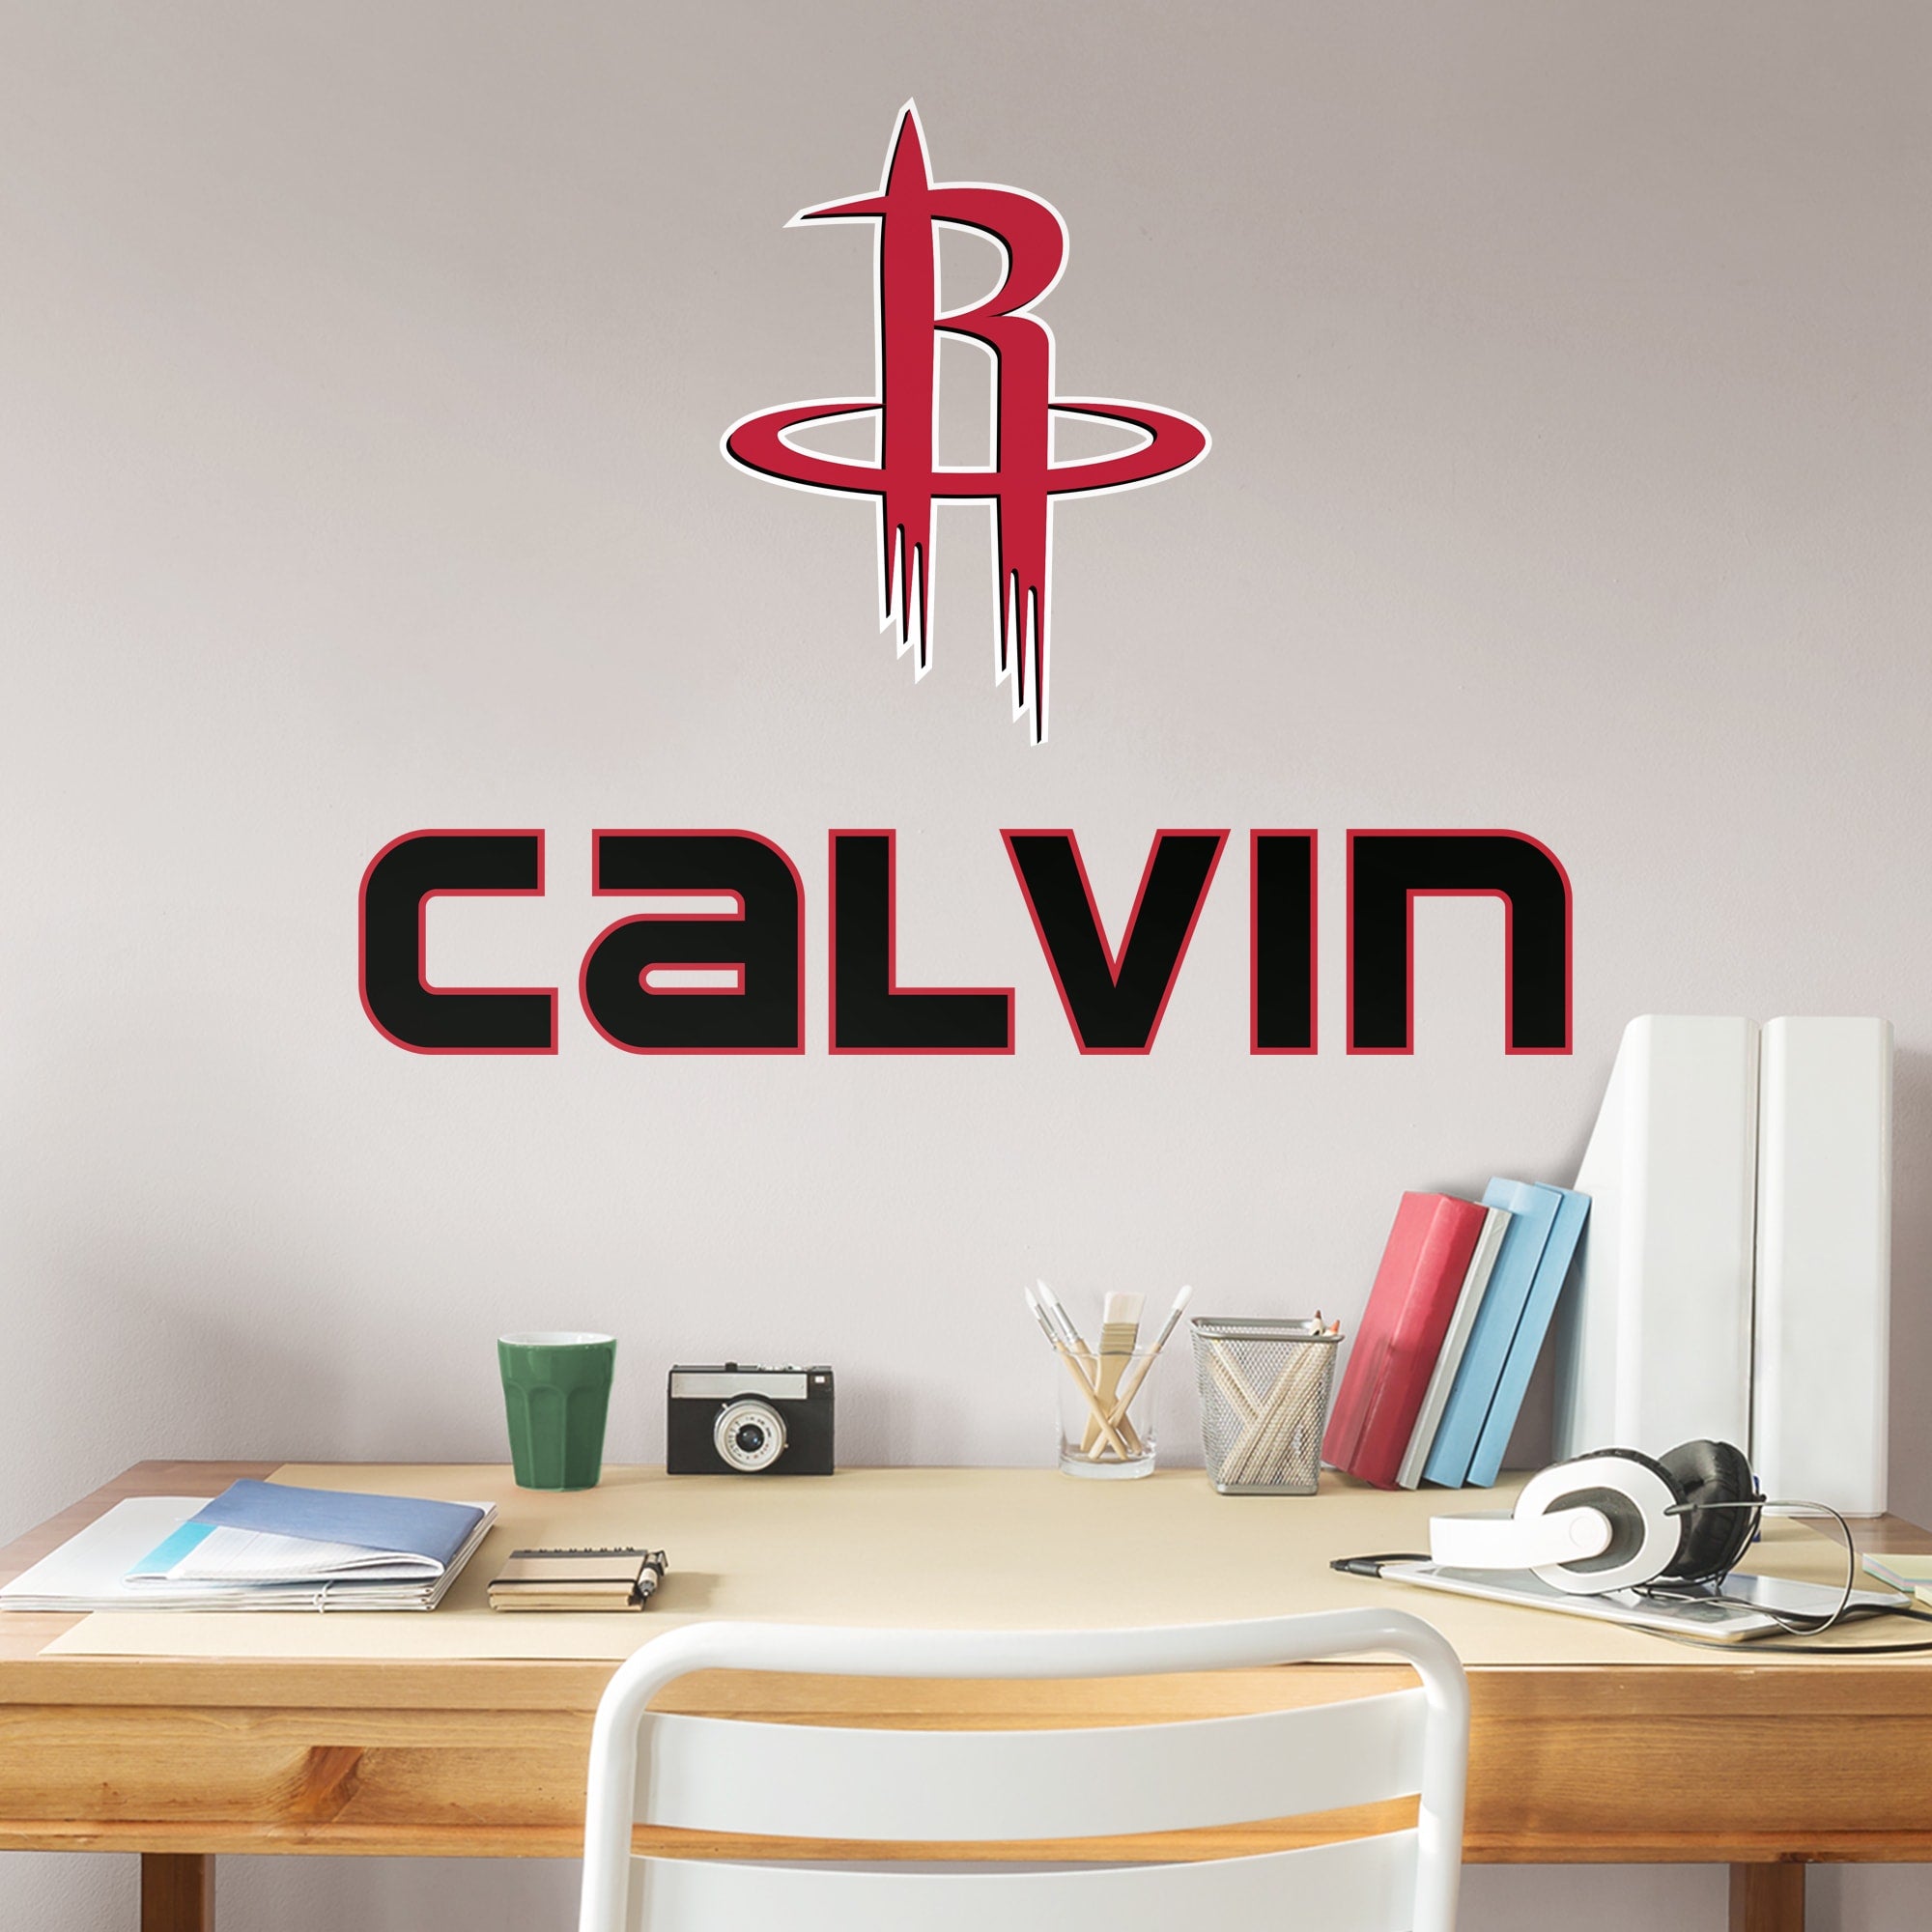 Houston Rockets: Stacked Personalized Name - Officially Licensed NBA Transfer Decal in Black (17"W x 23"H) by Fathead | Vinyl